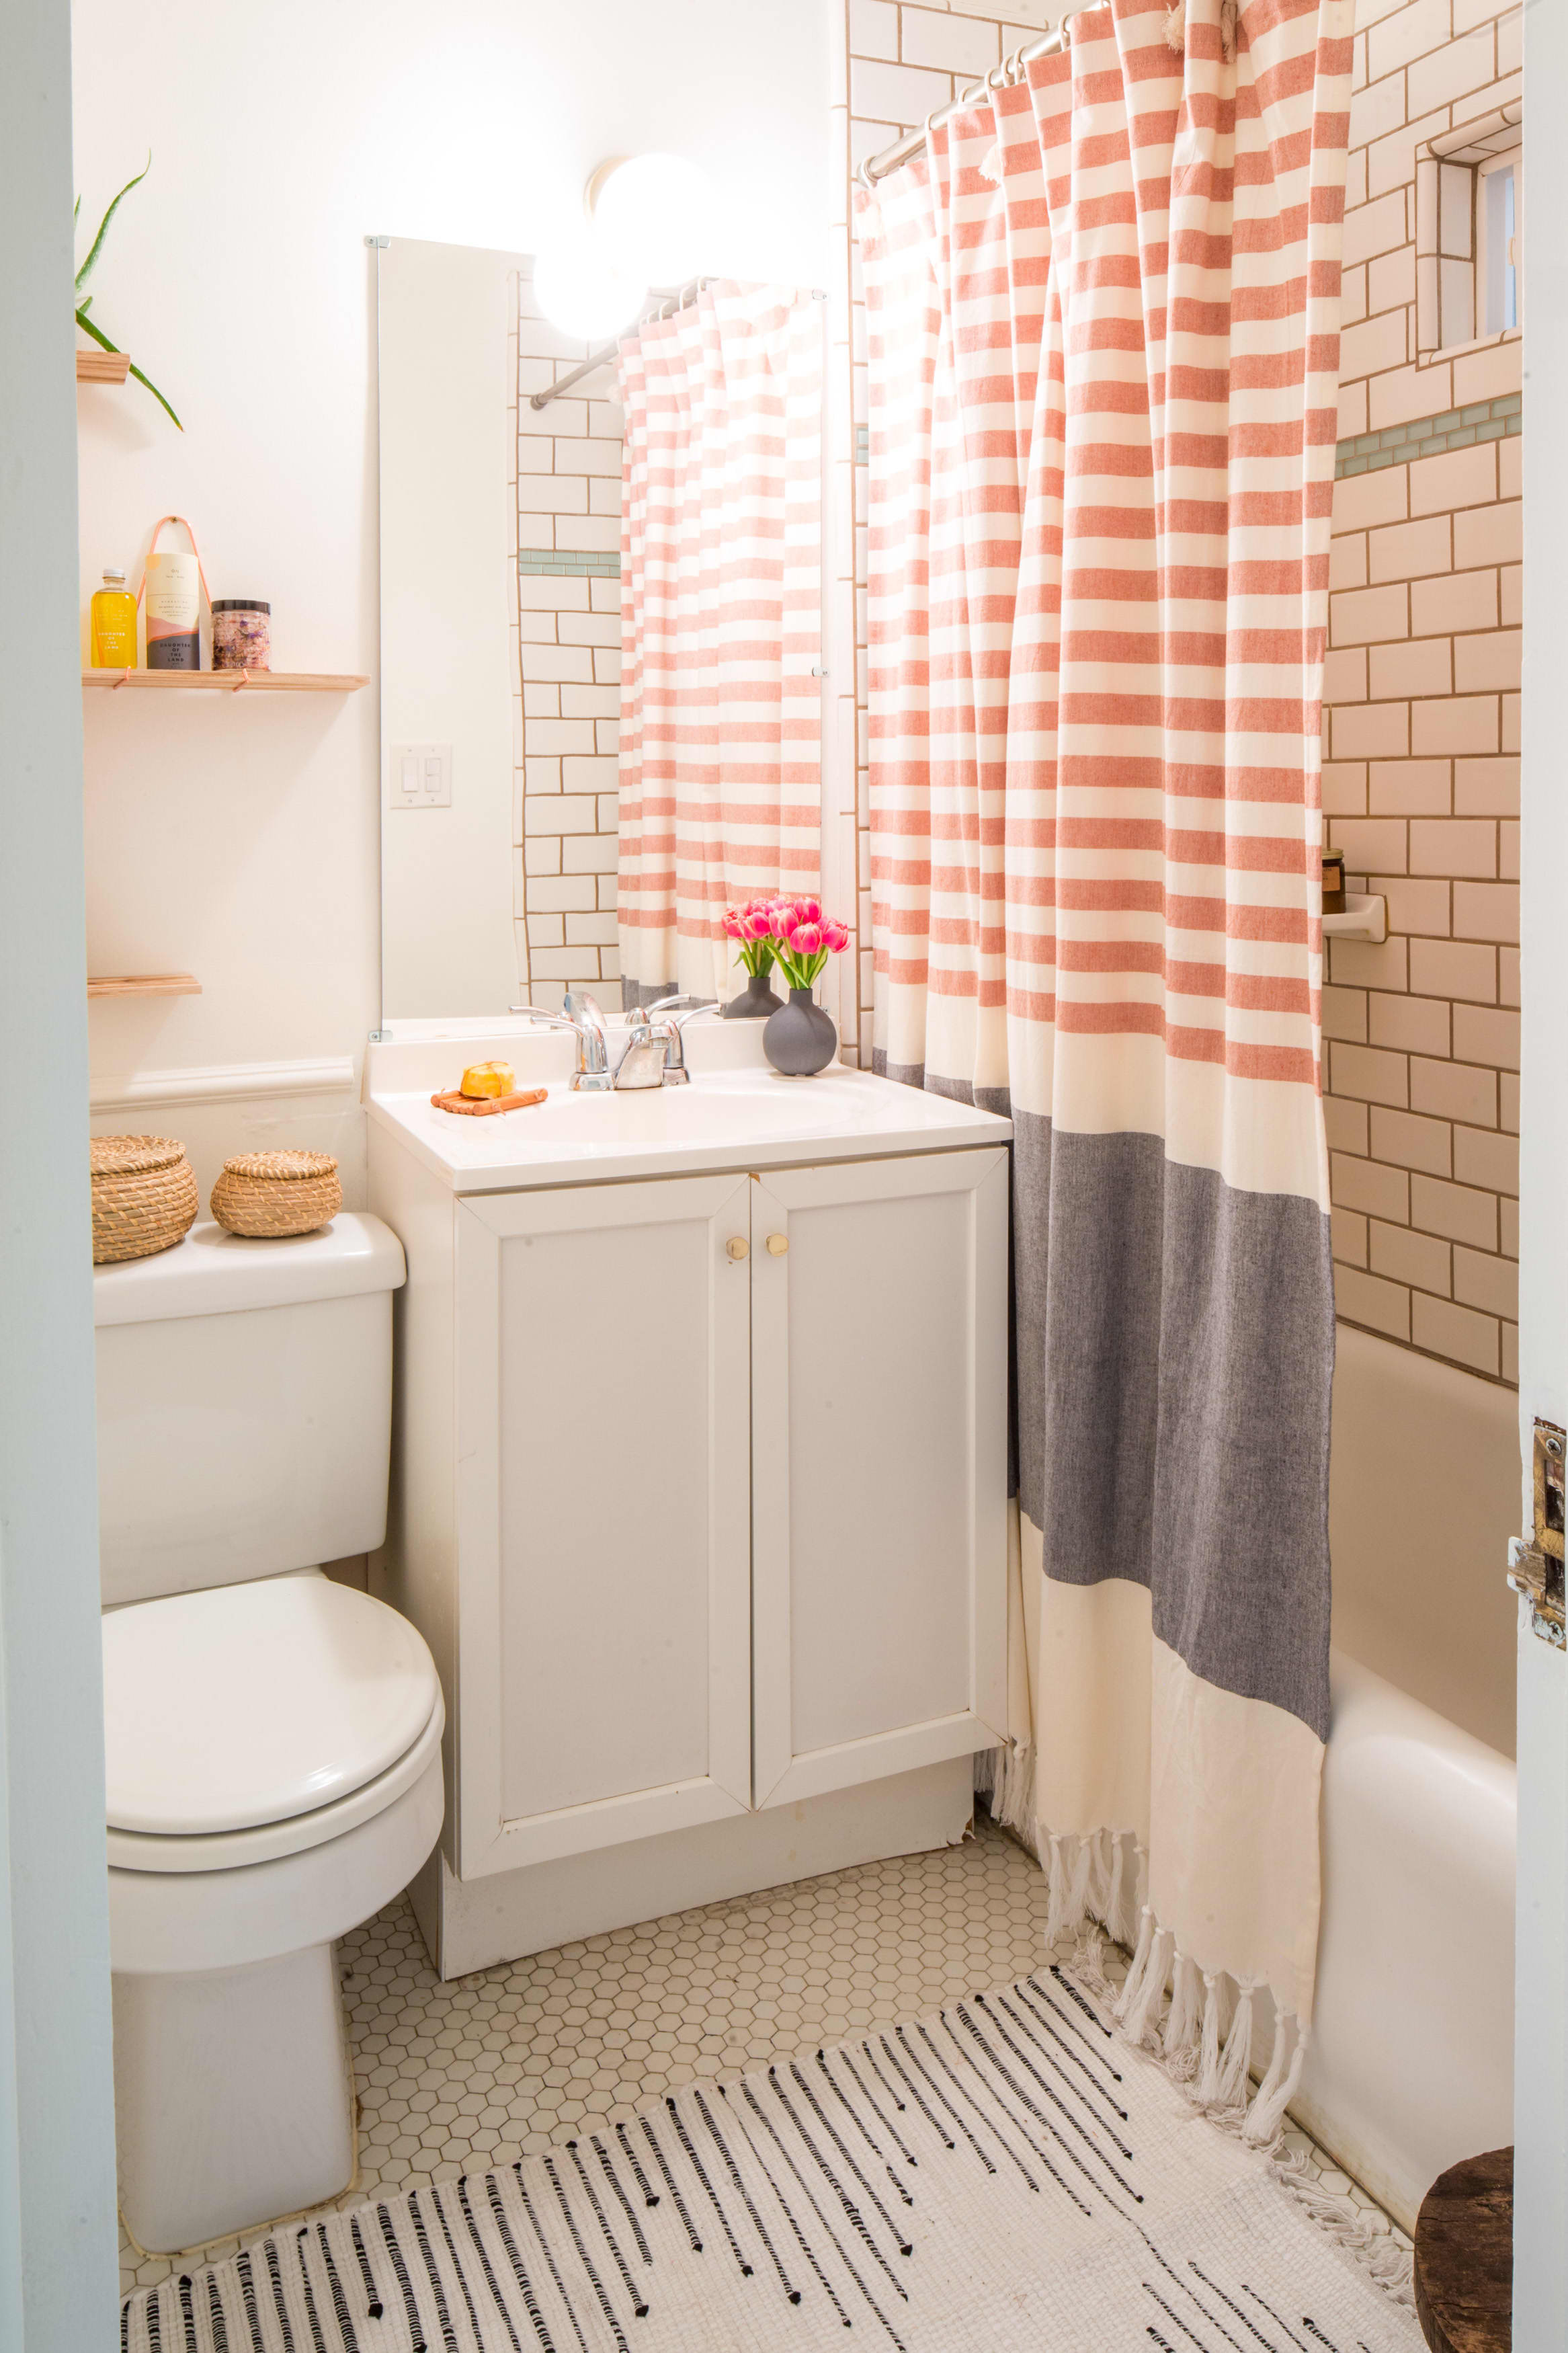 View Bathroom Storage For Small Spaces Pictures